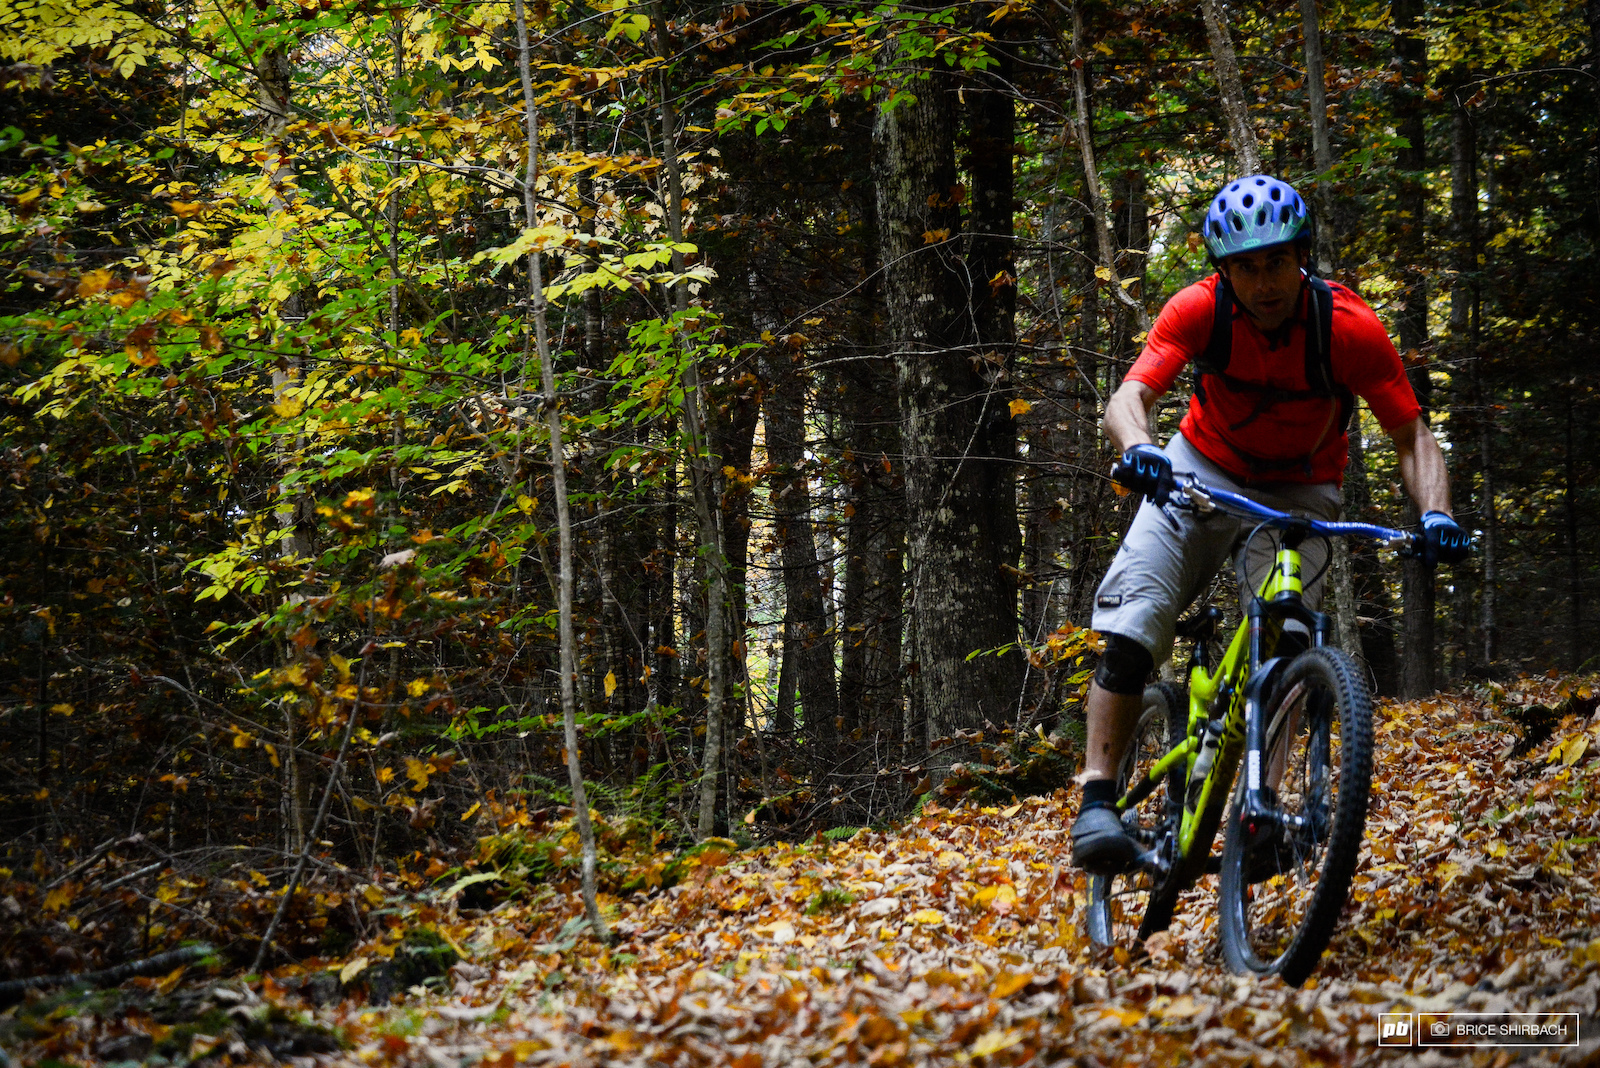 The best town ever? East Burke, VT is surely in the running. Get yourself to the Kingdom Trails and sample the goods!